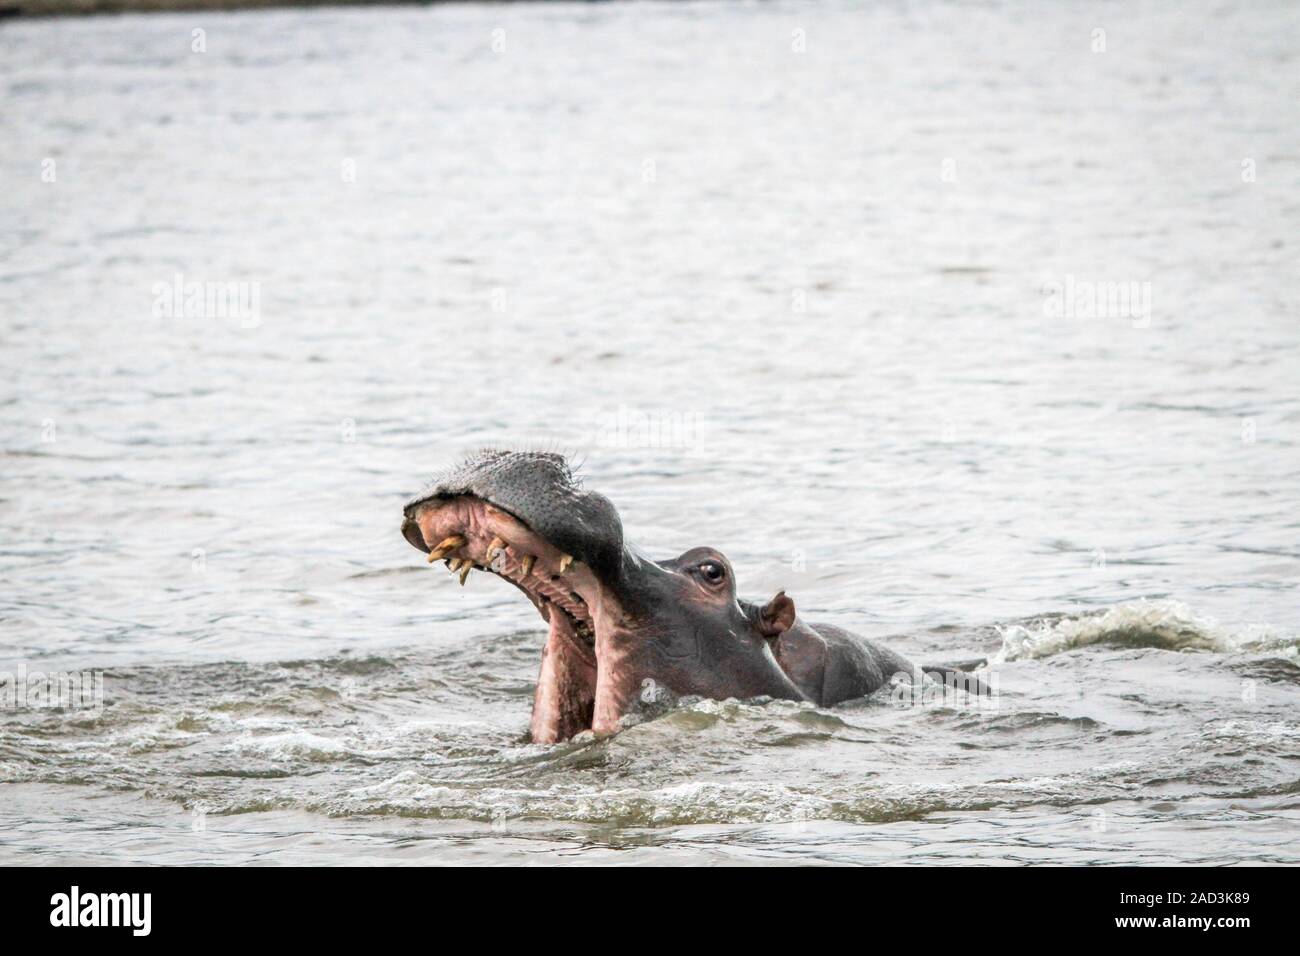 Hippo yawning in the water. Stock Photo